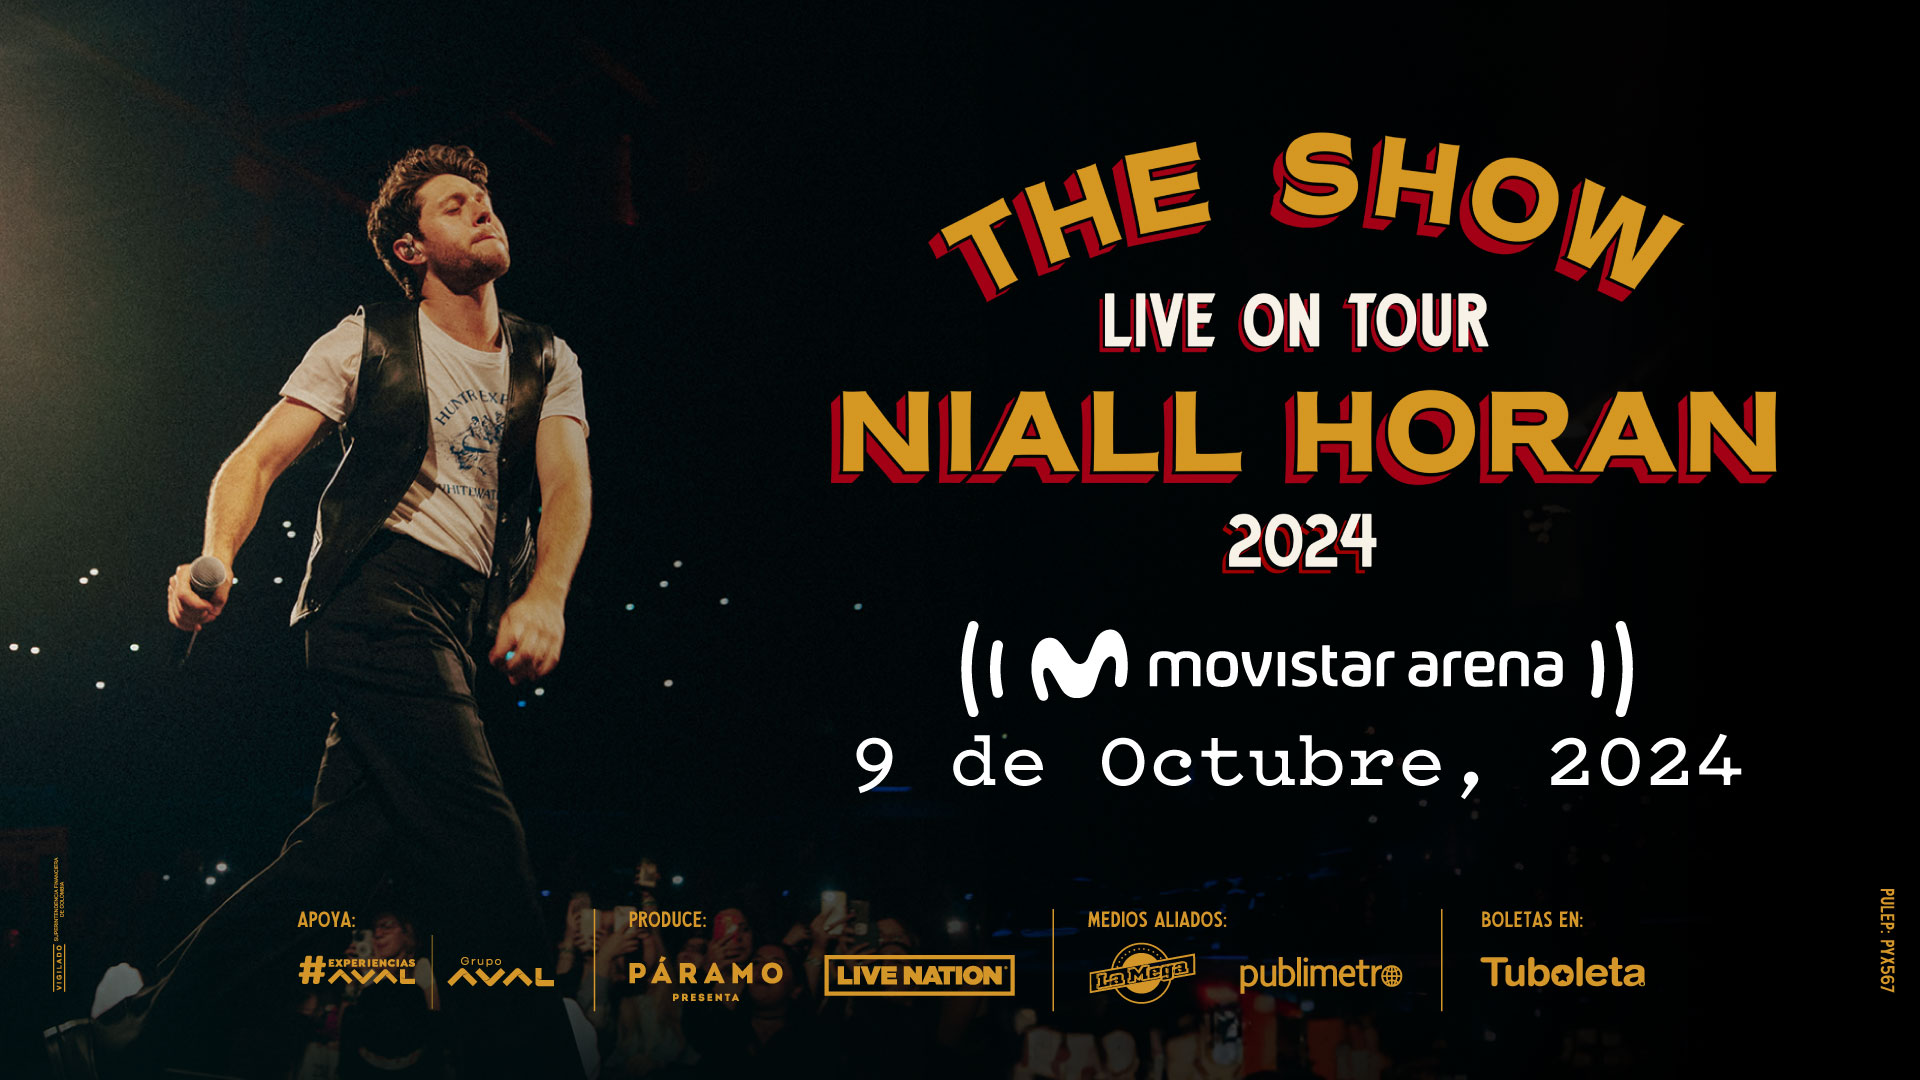 niall horan the show live on tour 2